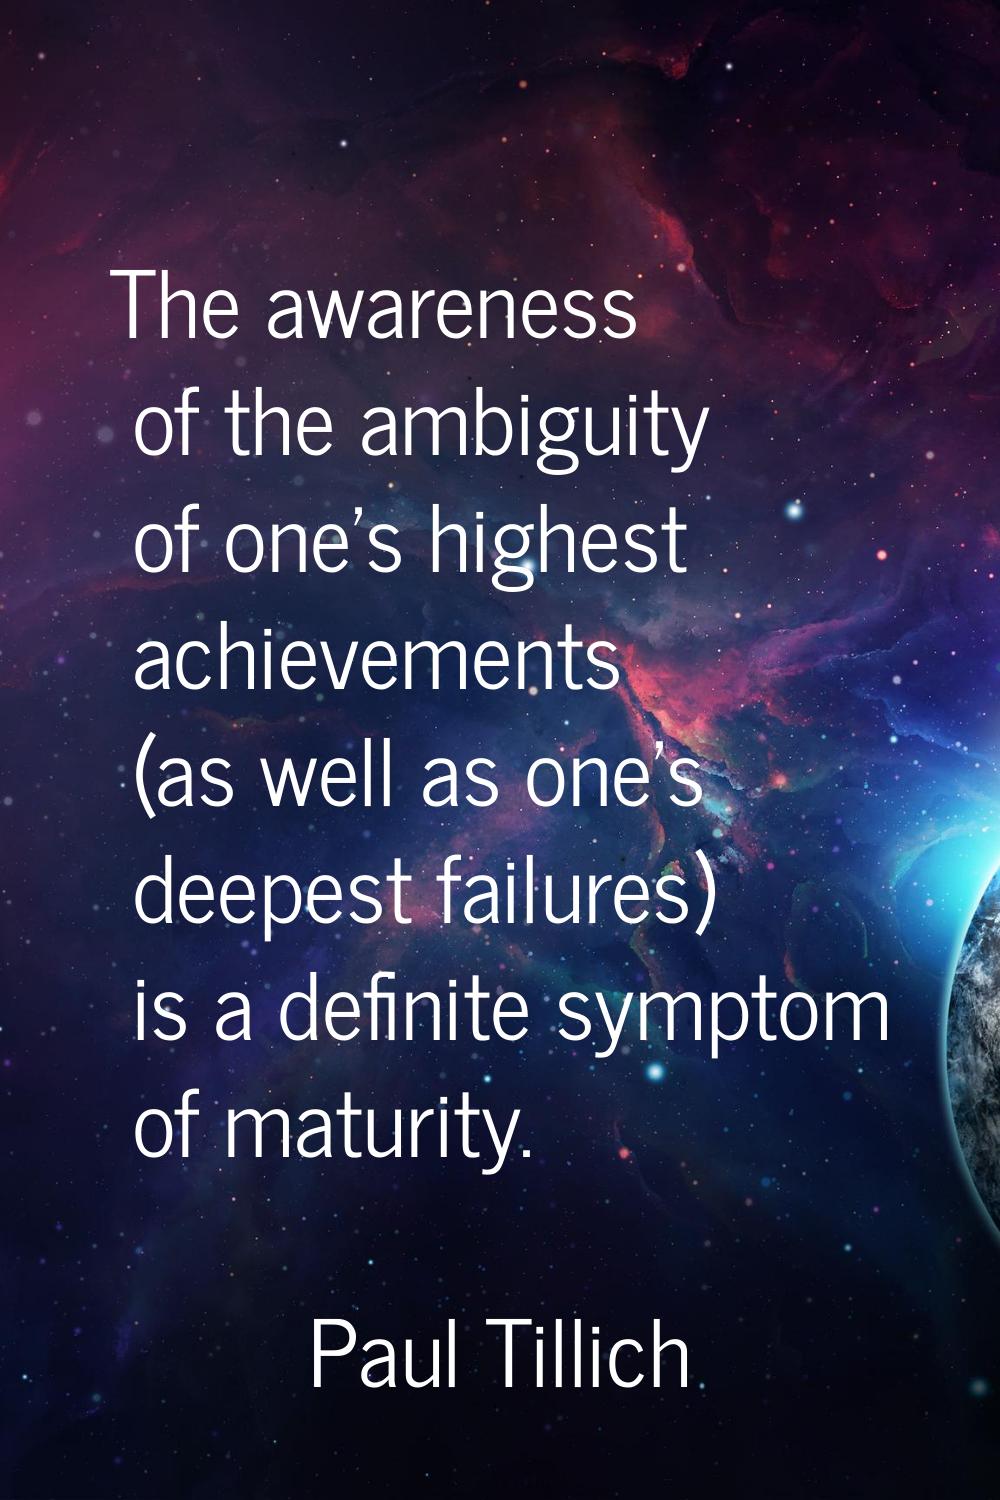 The awareness of the ambiguity of one's highest achievements (as well as one's deepest failures) is